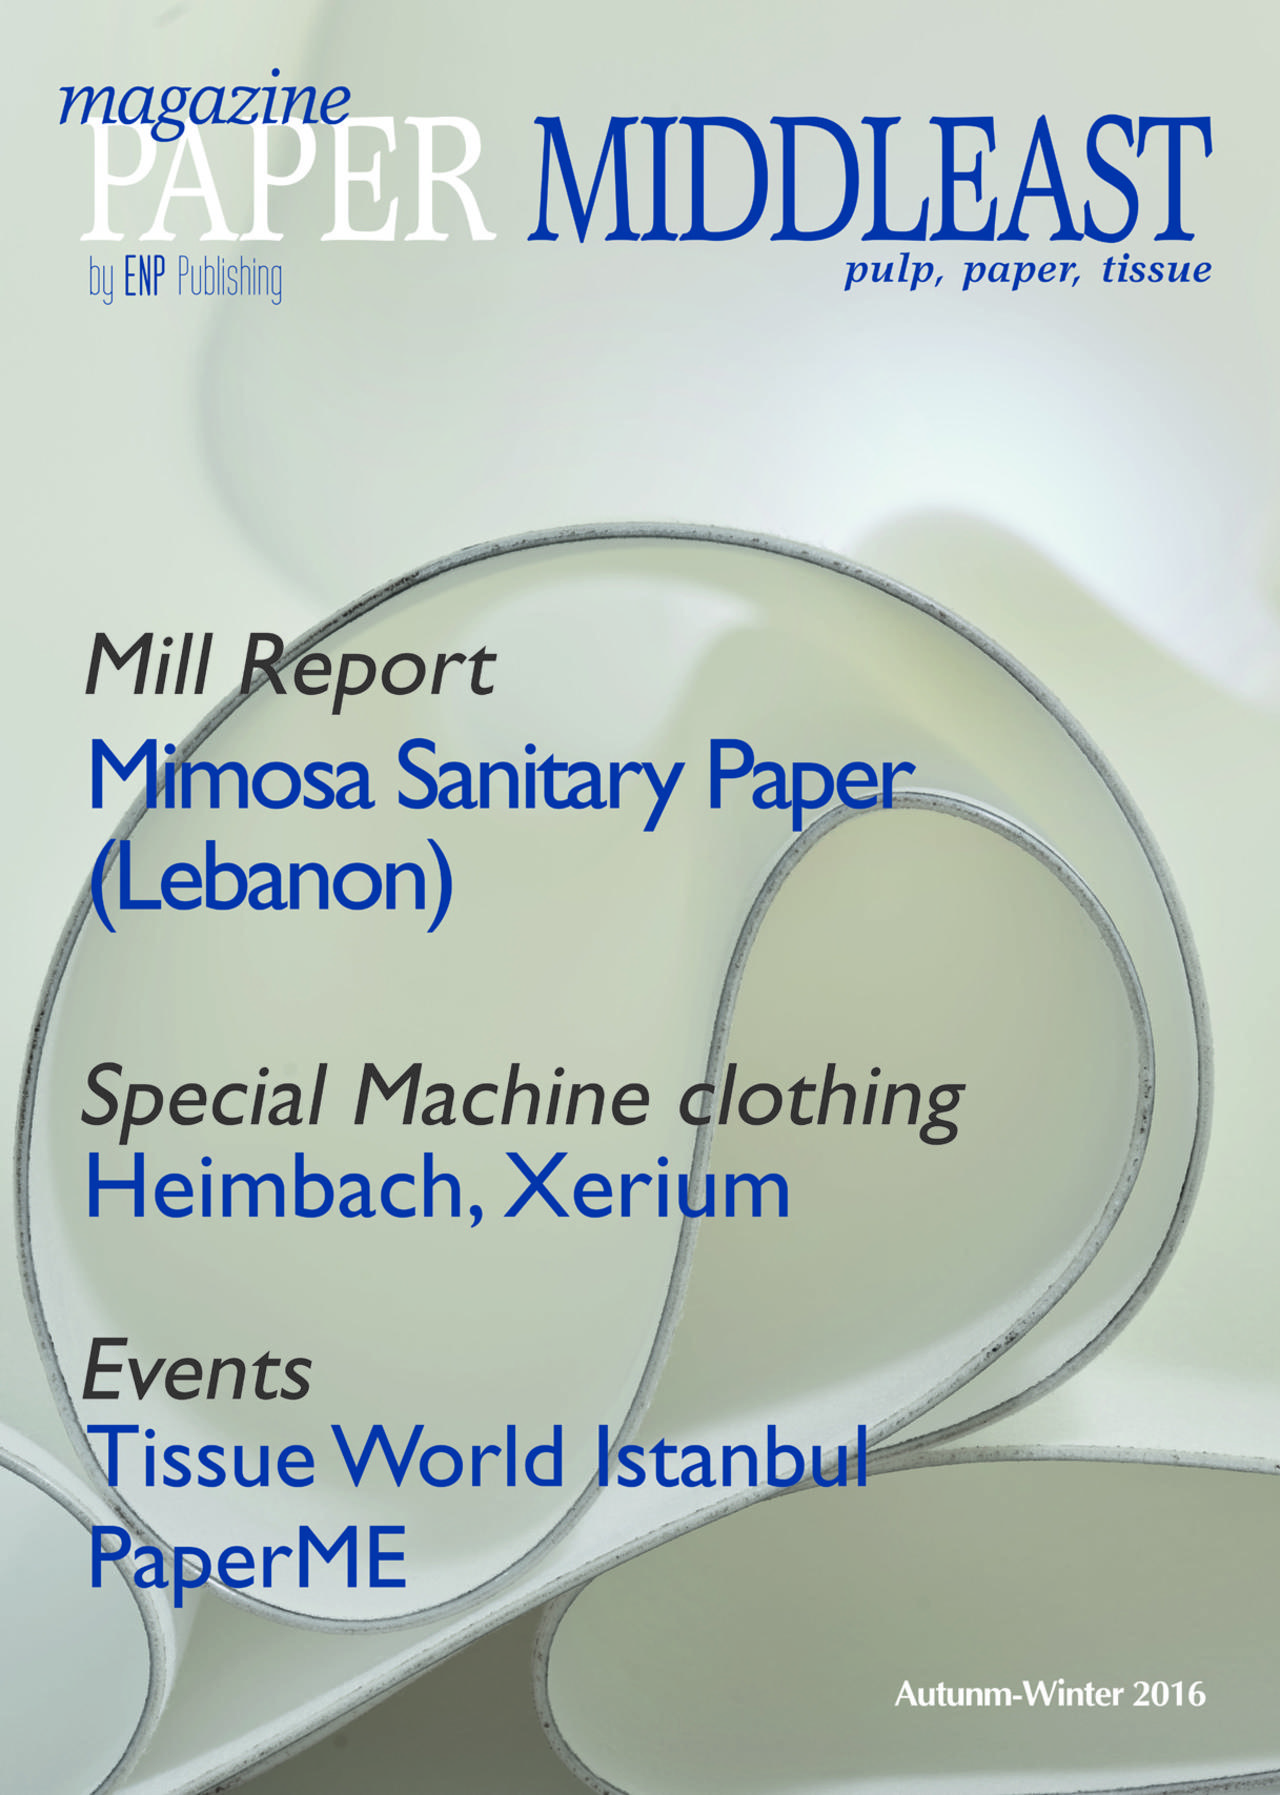 Paper Middleast magazine